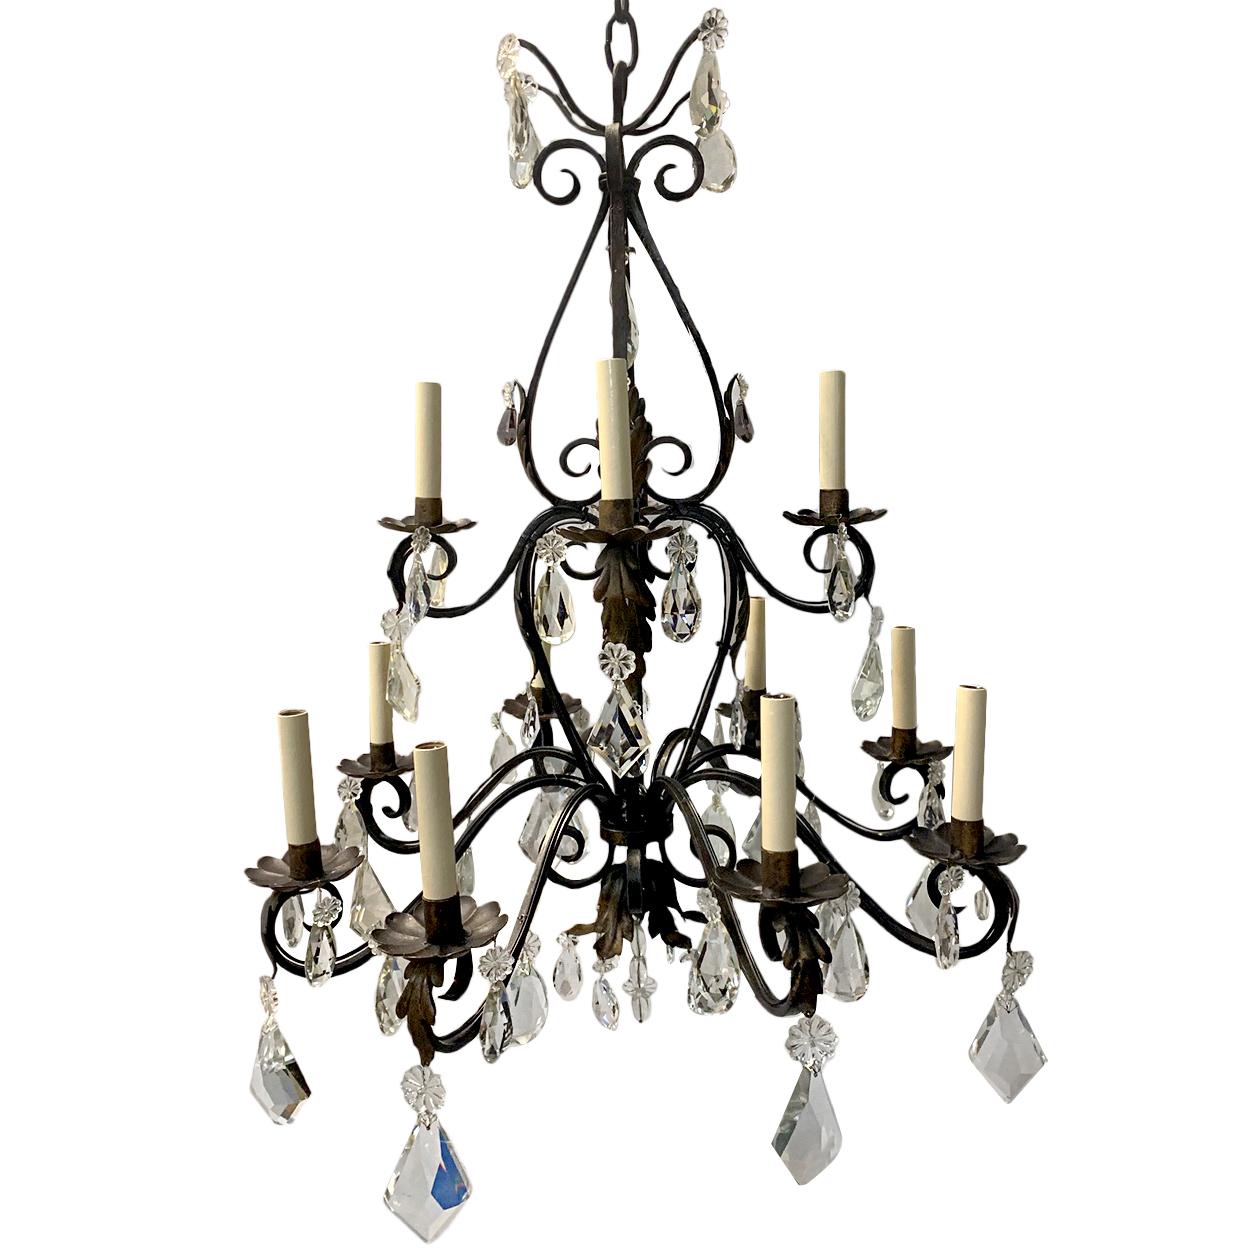 A French circa 1900s wrought iron double tiered twelve-light chandelier with crystals and original patina. 

Measurements:
Height 35